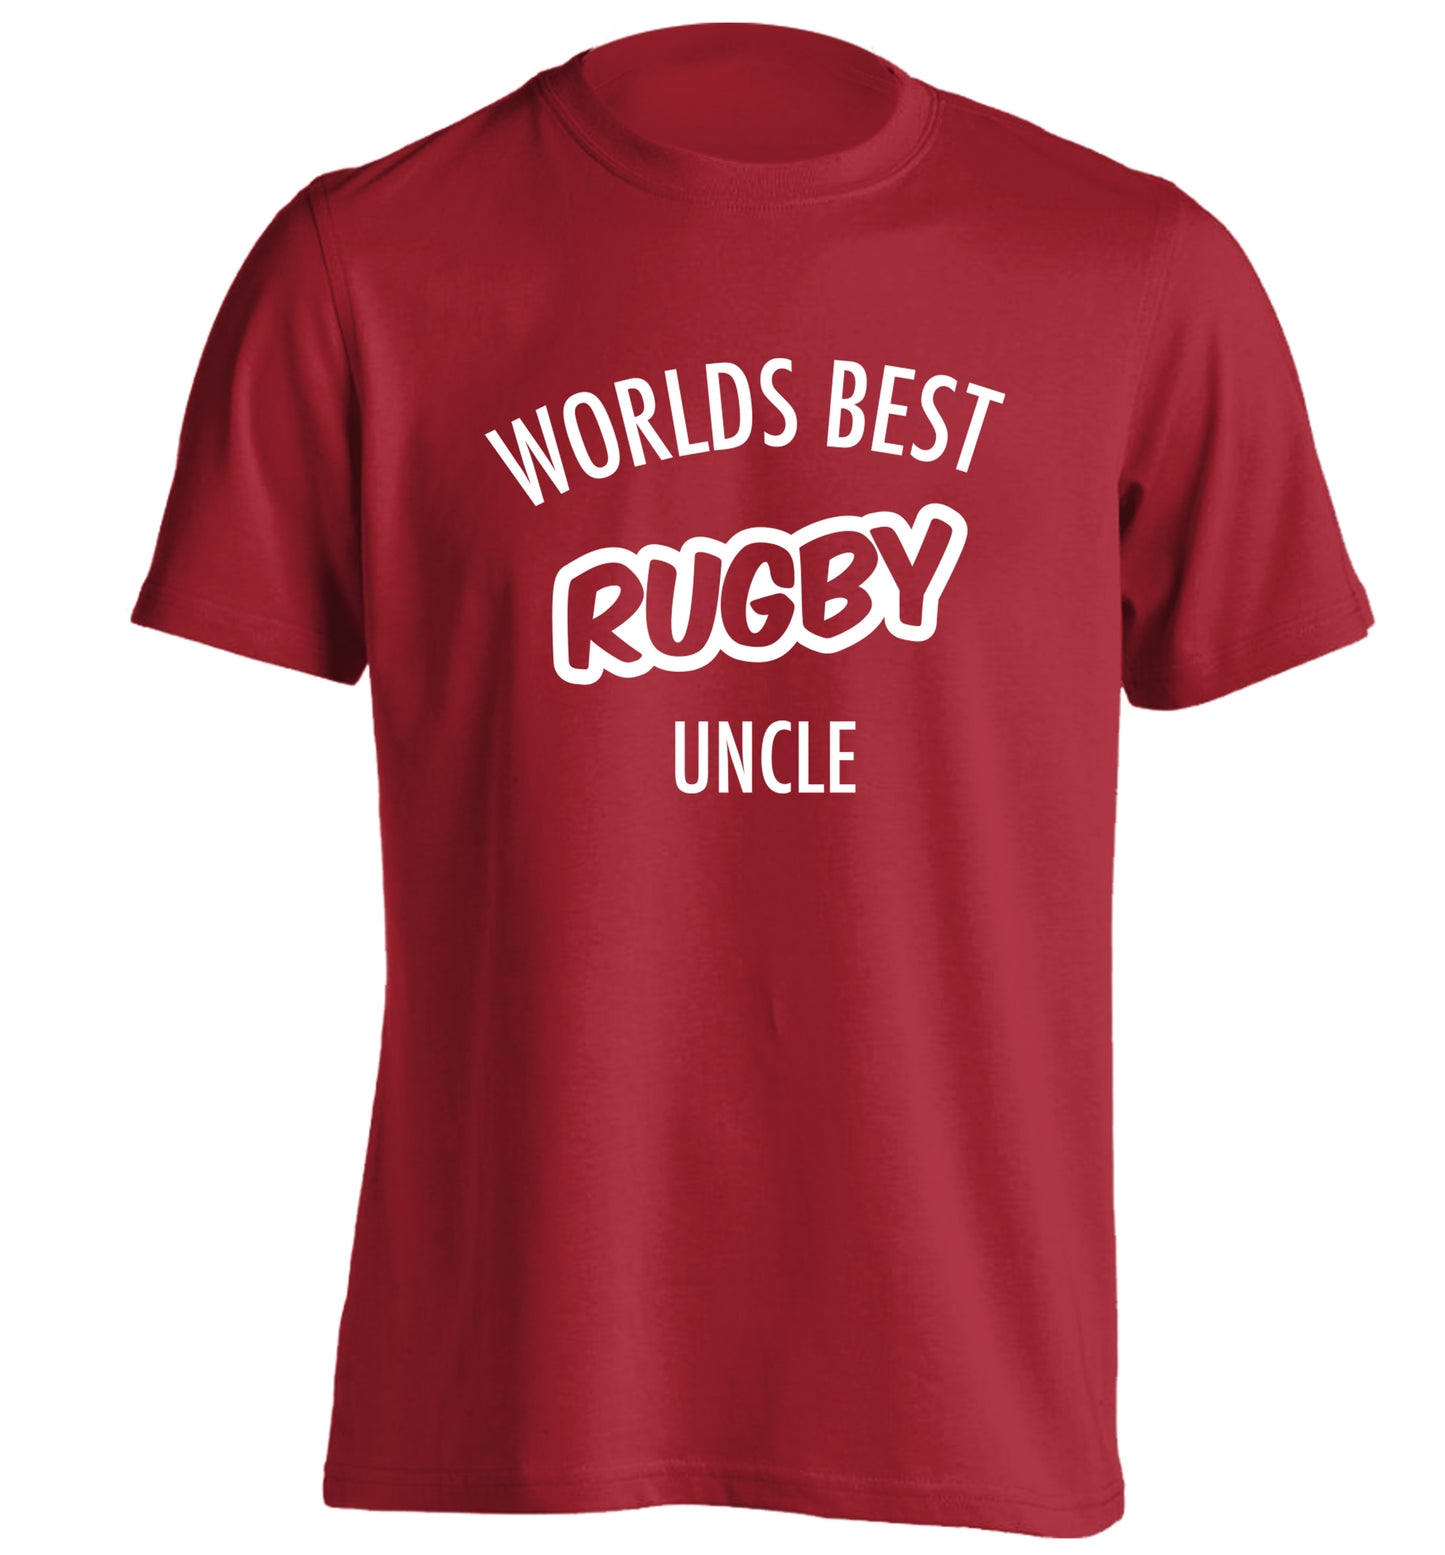 Worlds best rugby uncle adults unisex red Tshirt 2XL